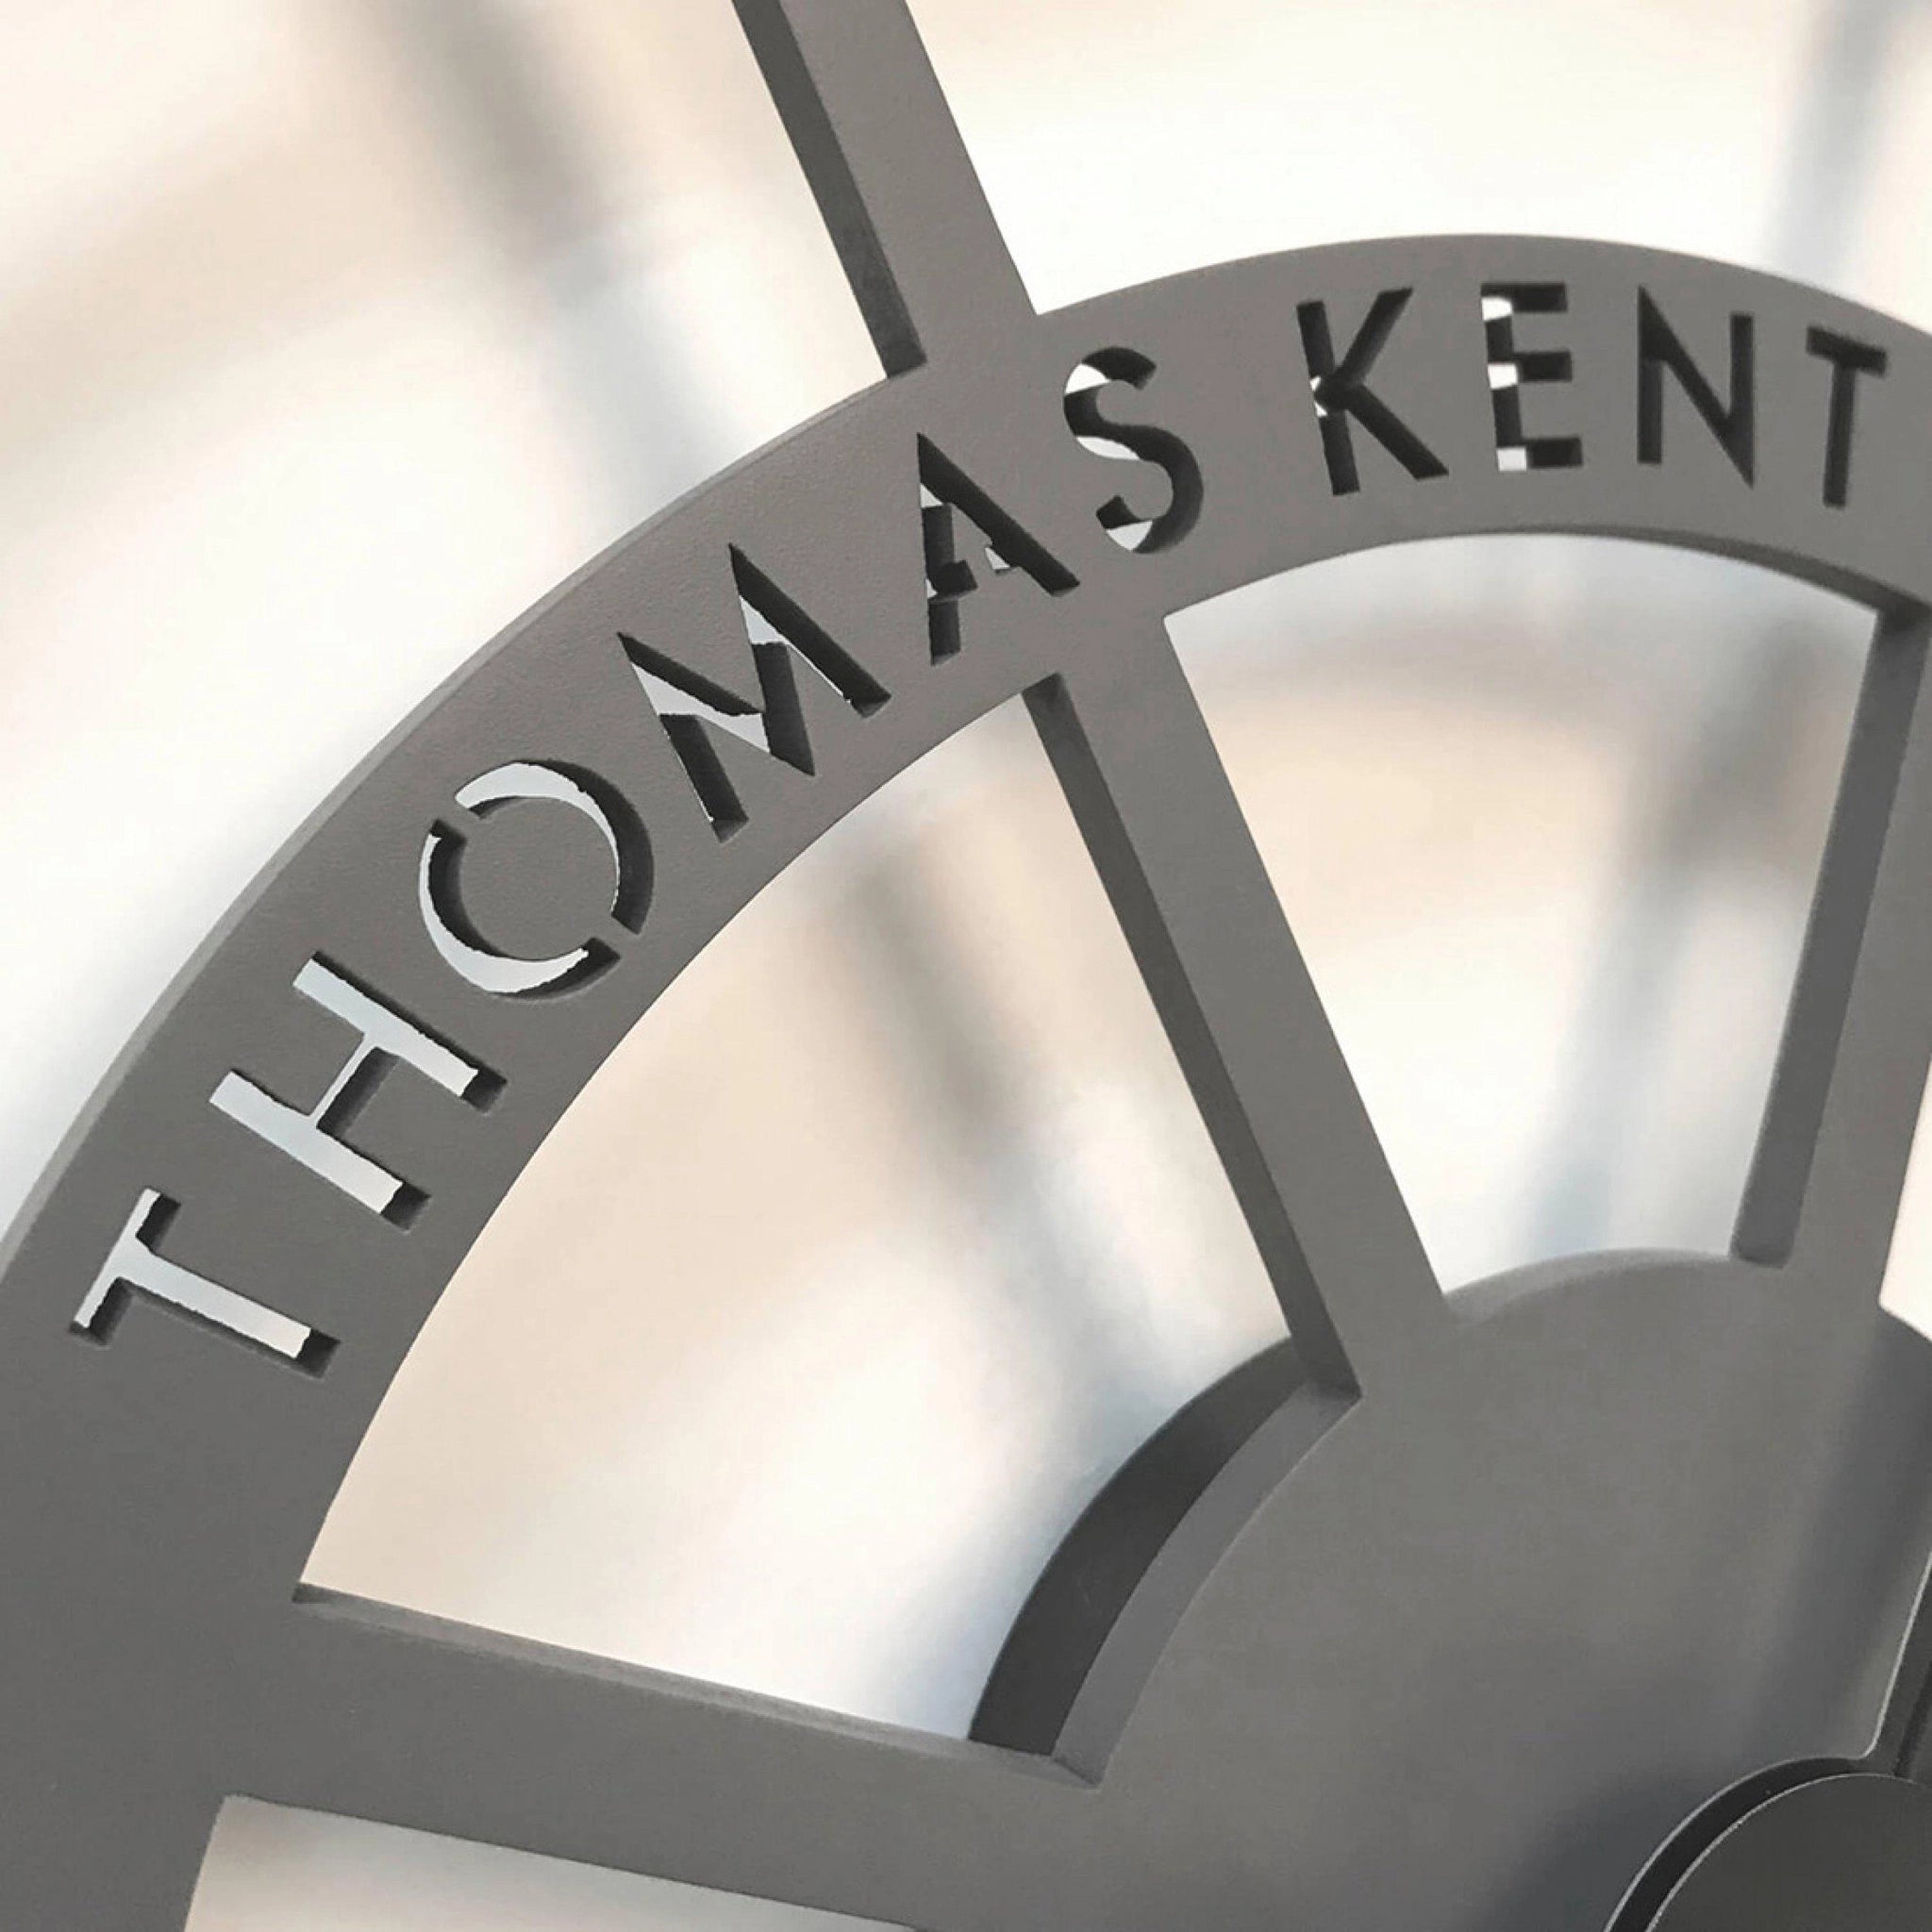 Close-up detail of skeleton wall clock with grey frame and Thomas Kent logo.